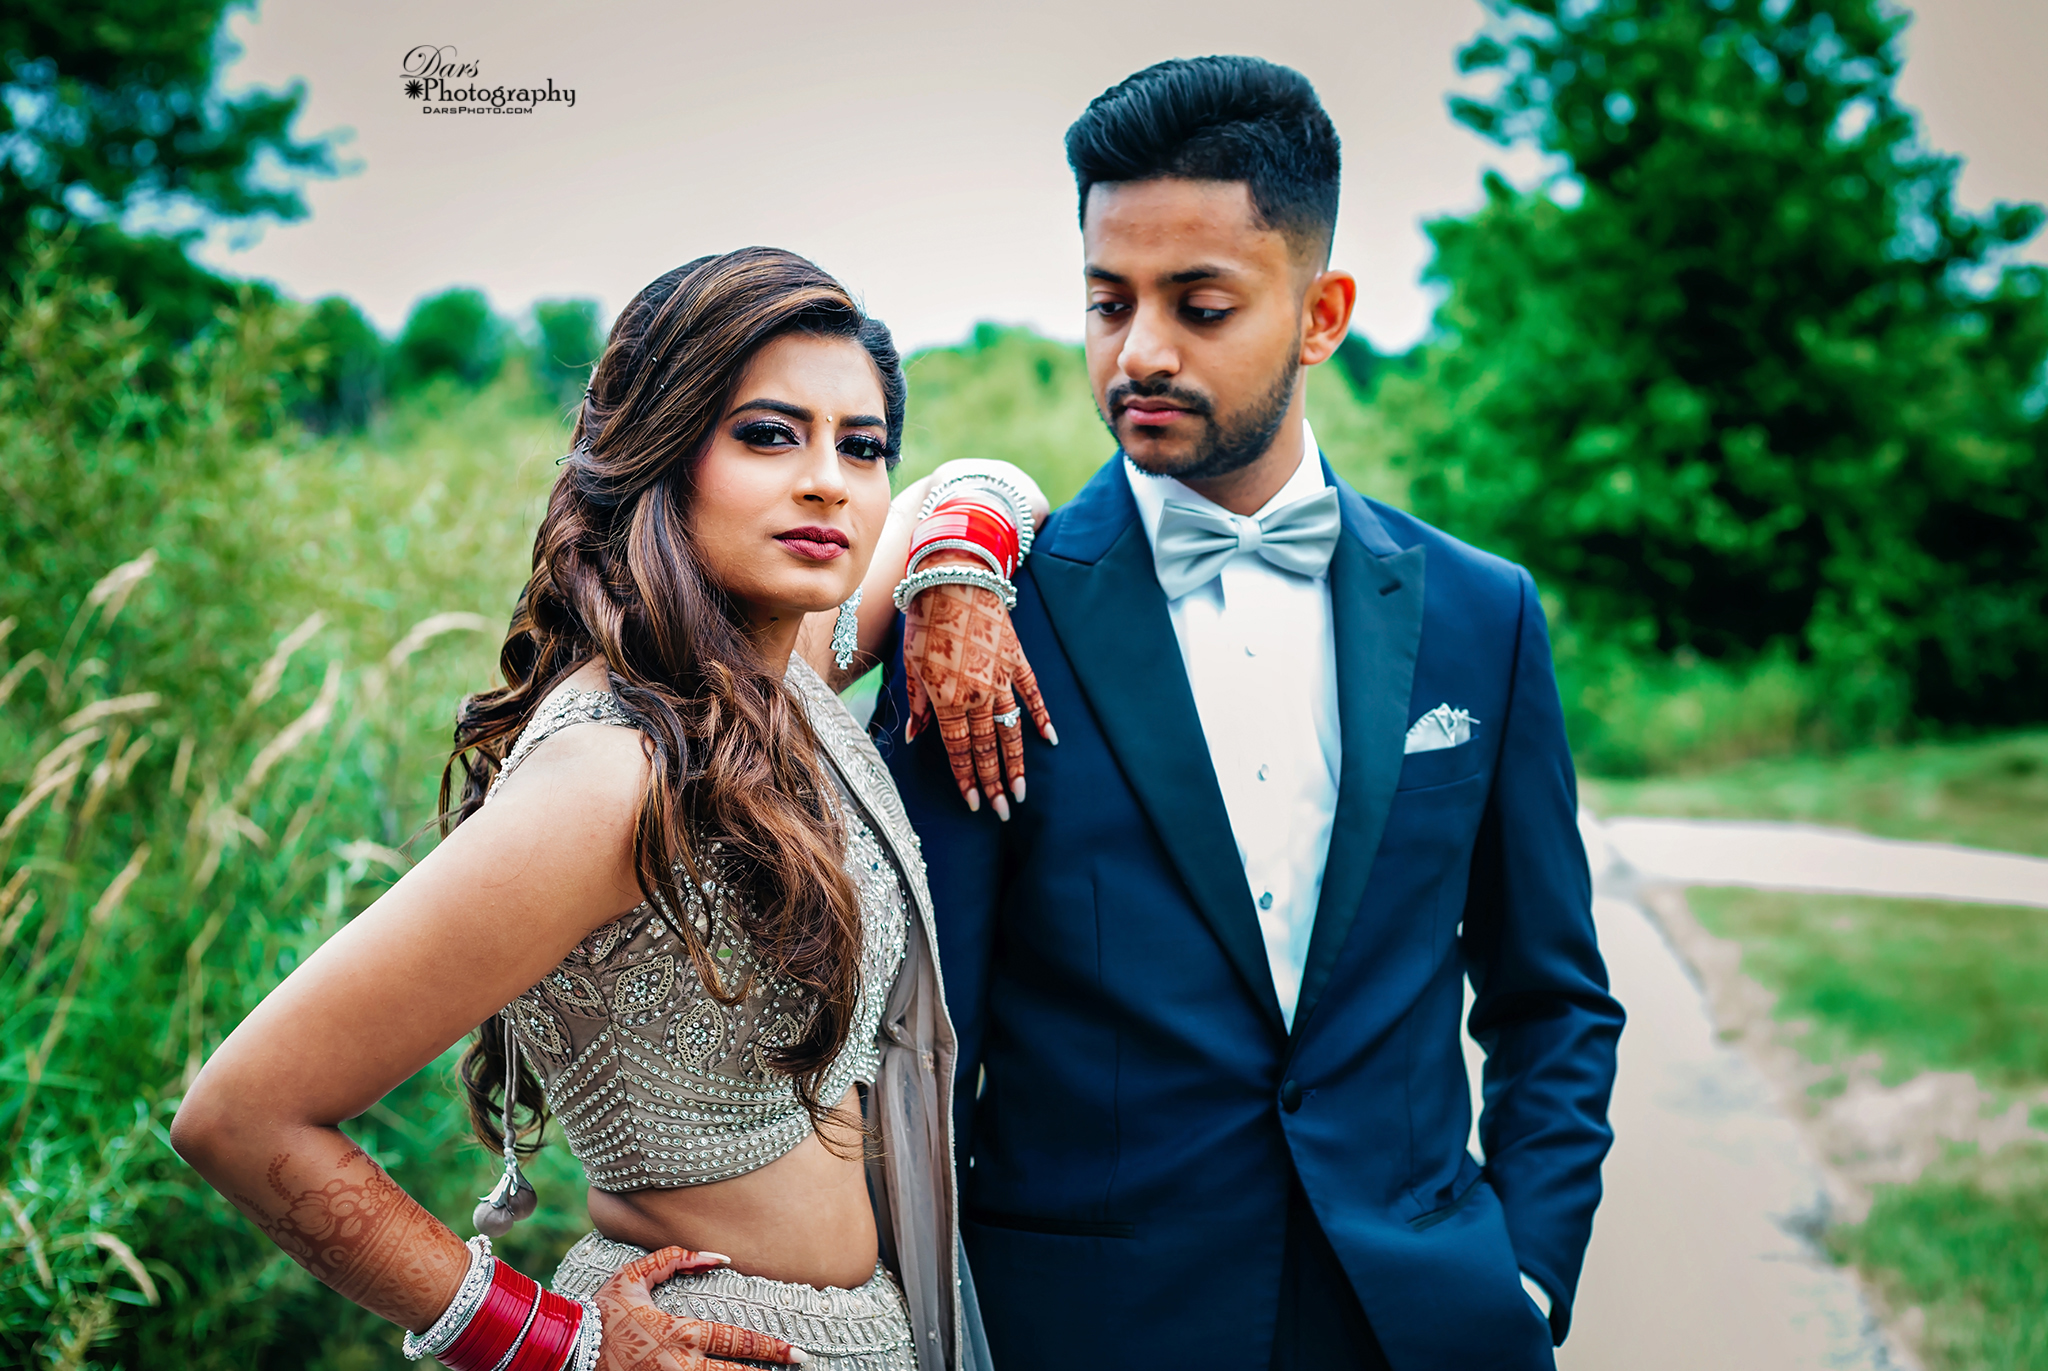 A Colourful Wedding Story Of Two Doctors – Shopzters